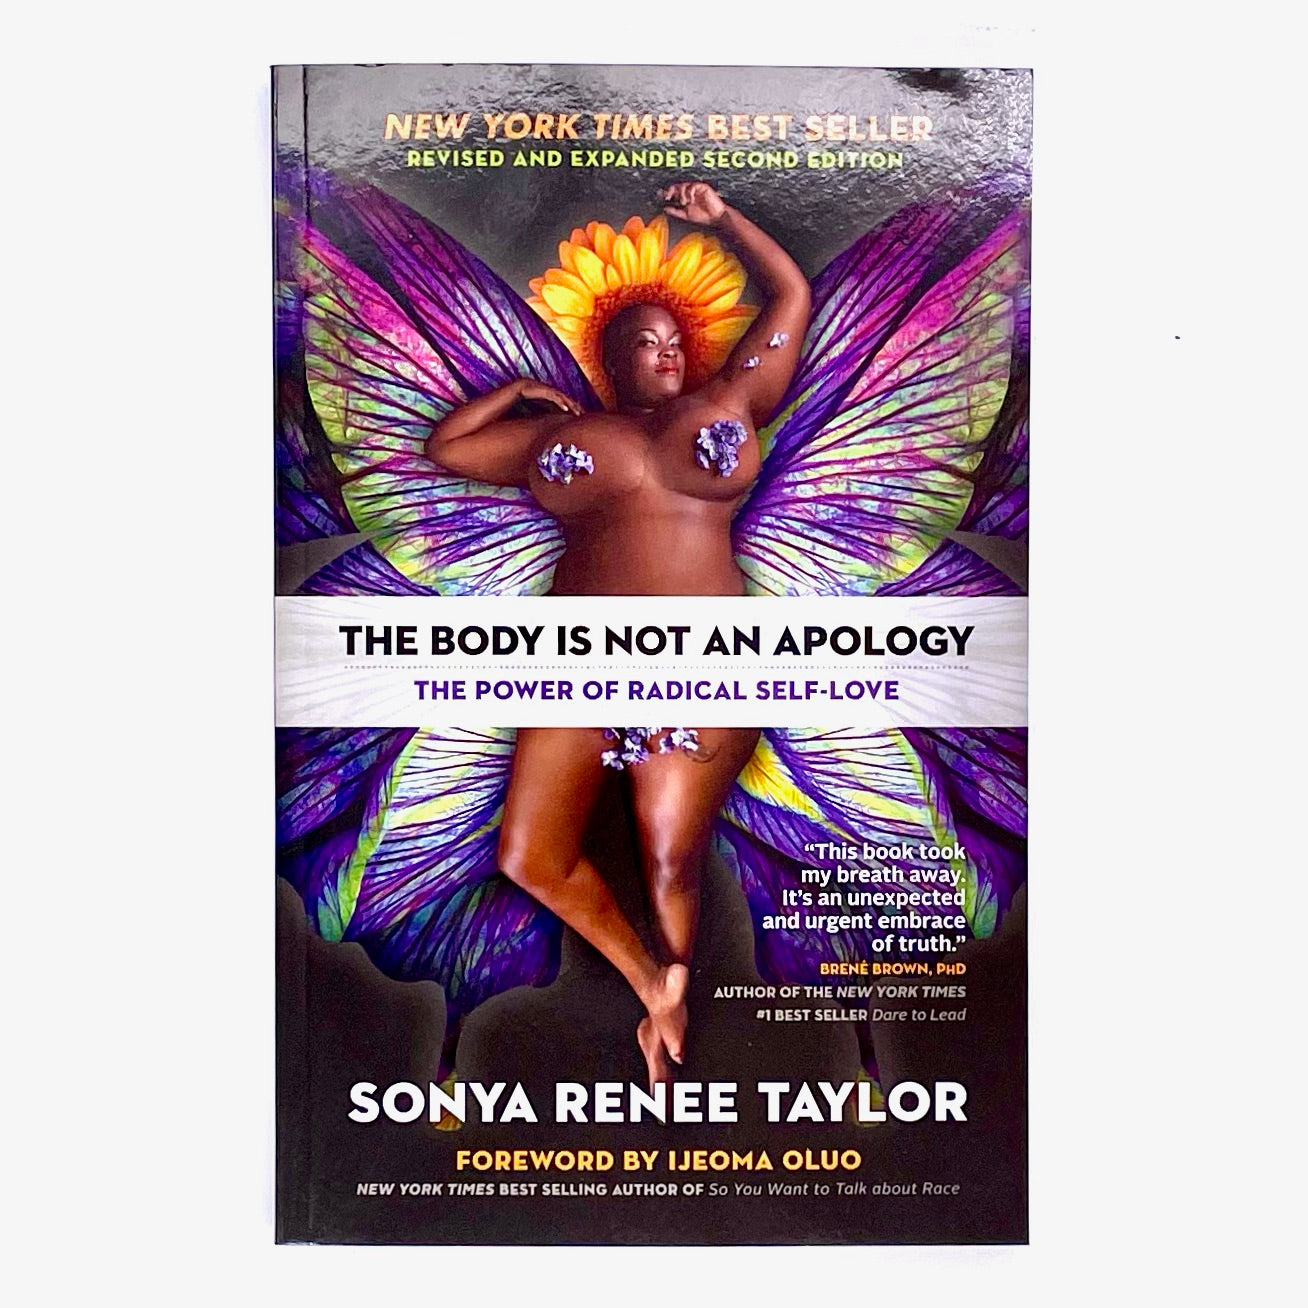 Book cover of The Body is not an Apology, the power of radical self-love by Sonya Renee Taylor.